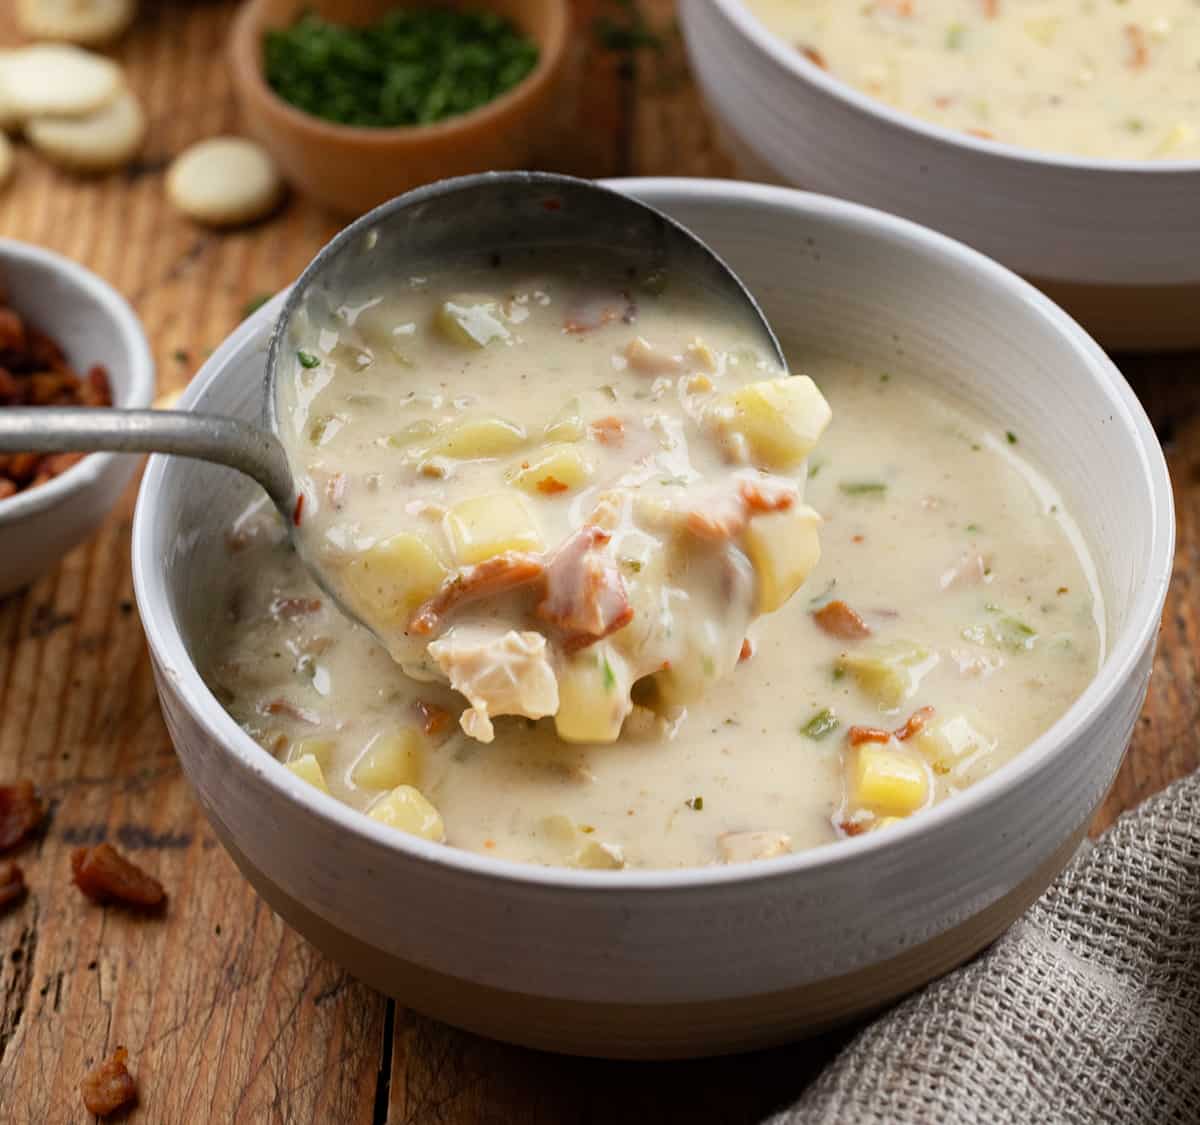 Pouring New England Clam Chowder into a bowl on a wooden table.